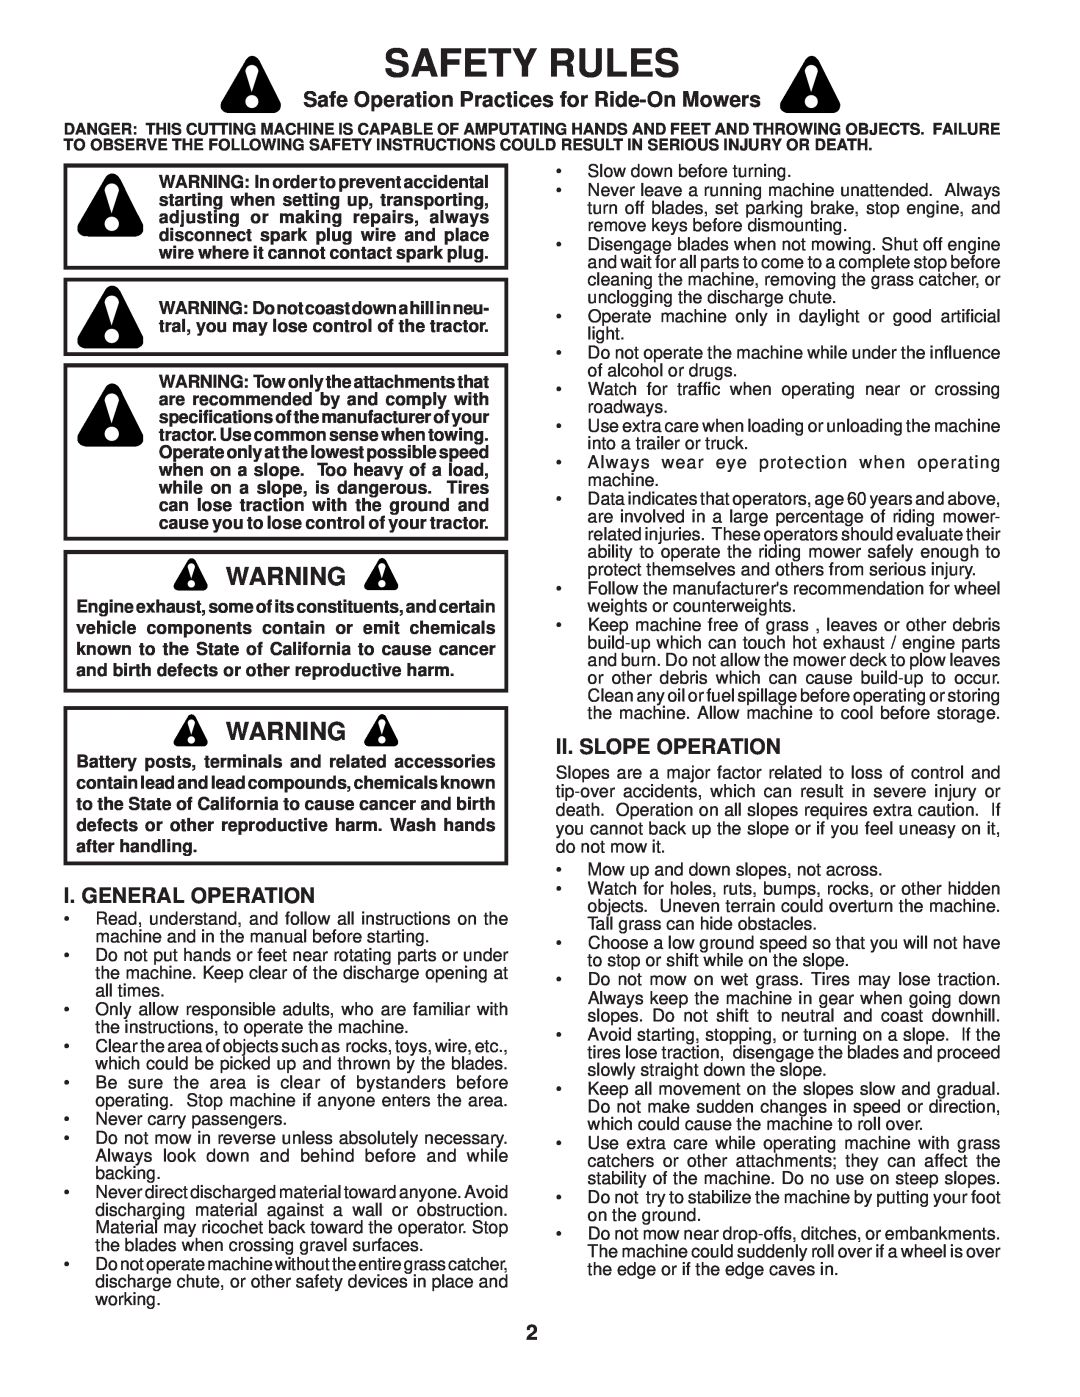 Husqvarna 960430120 Safety Rules, Safe Operation Practices for Ride-OnMowers, I. General Operation, Ii. Slope Operation 